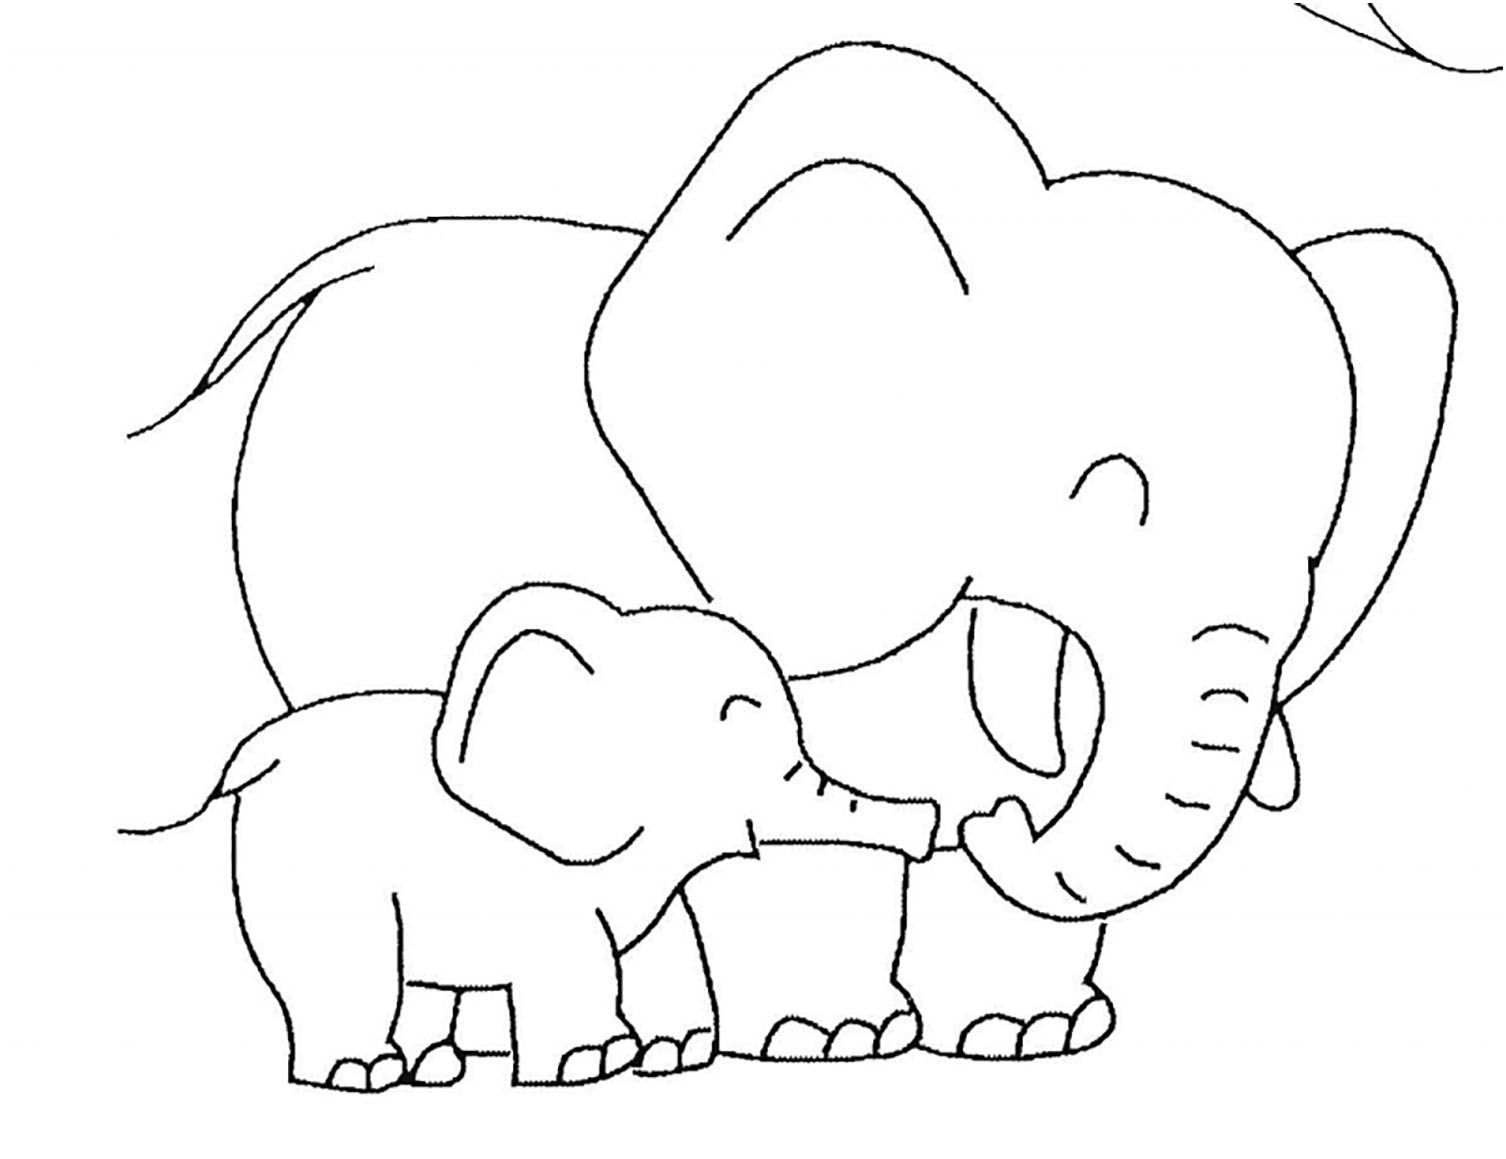 Elephant coloring pages to print - Elephants Kids Coloring Pages